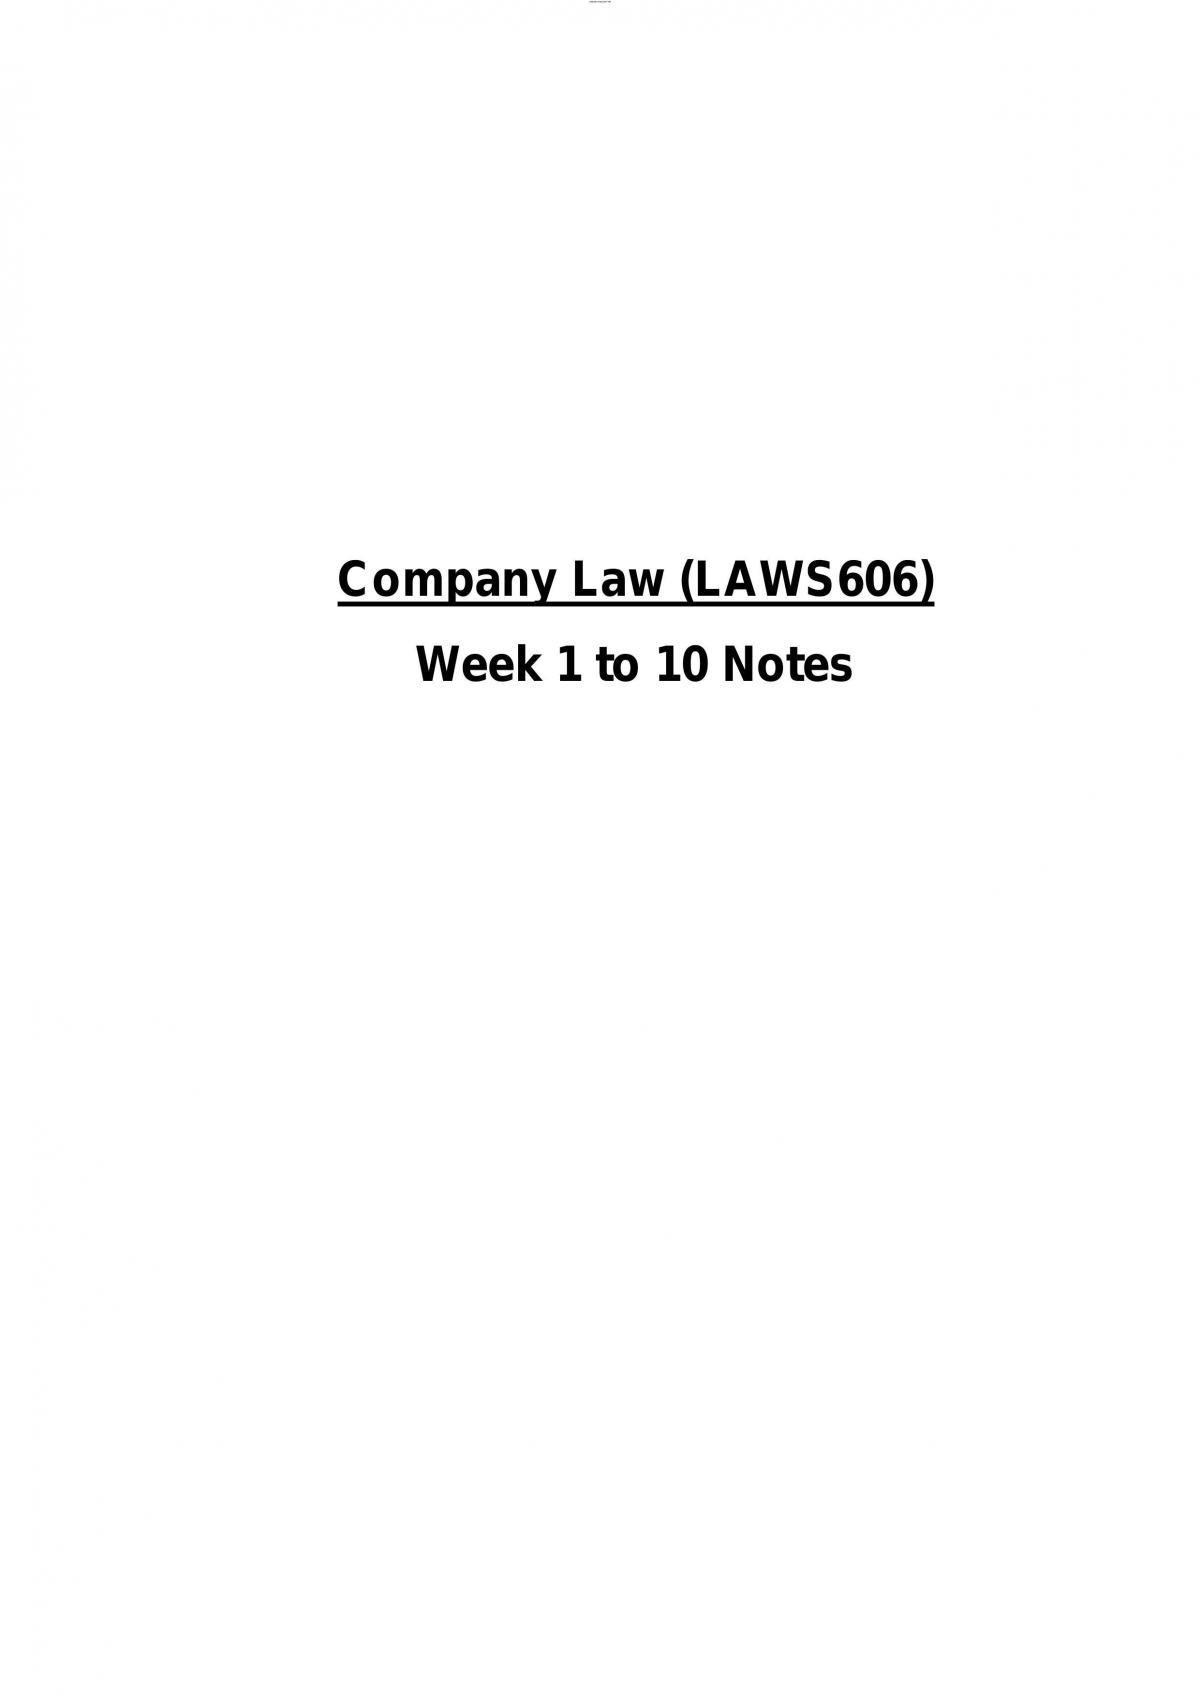 Company Law Week 1 to Week 10 - Page 1